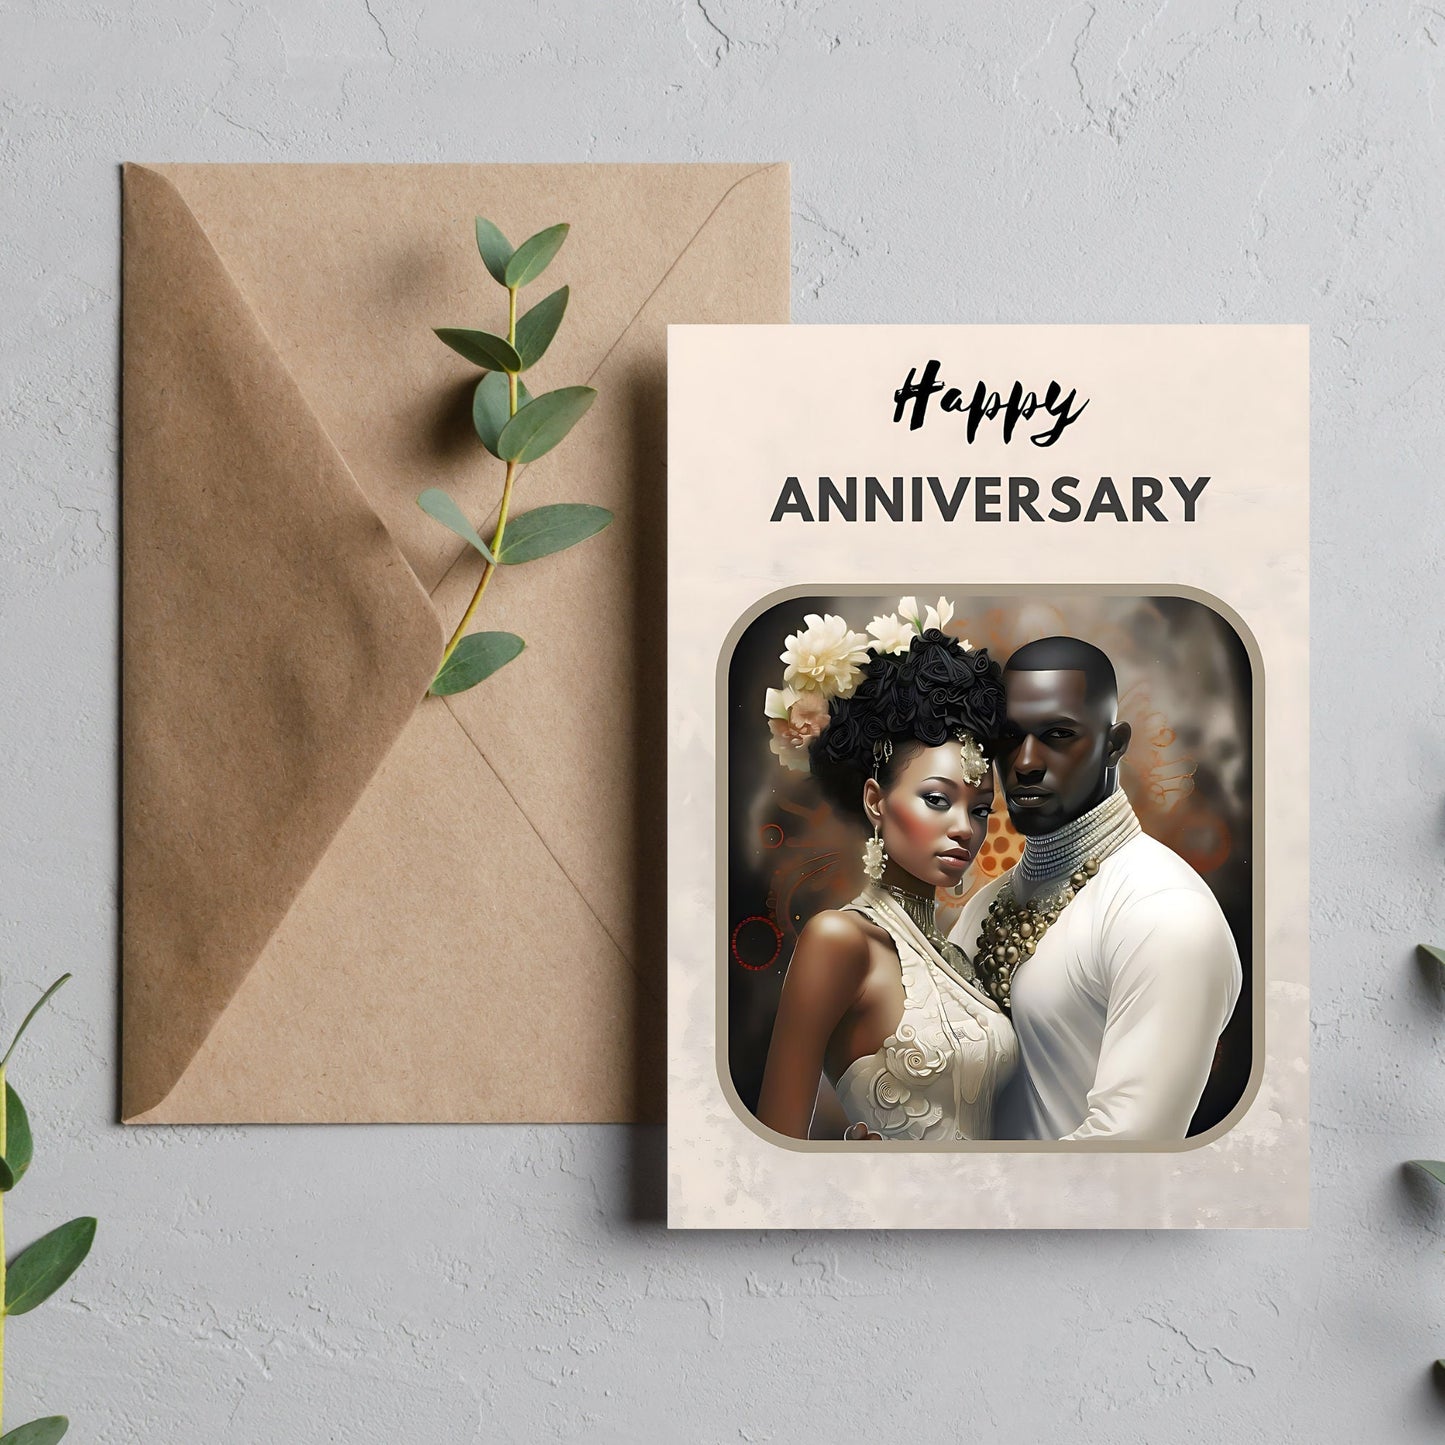 Happy Anniversary - Celebrate with Elegance: Black Art Greeting Cards for Every Occasion - Digital Instant Download